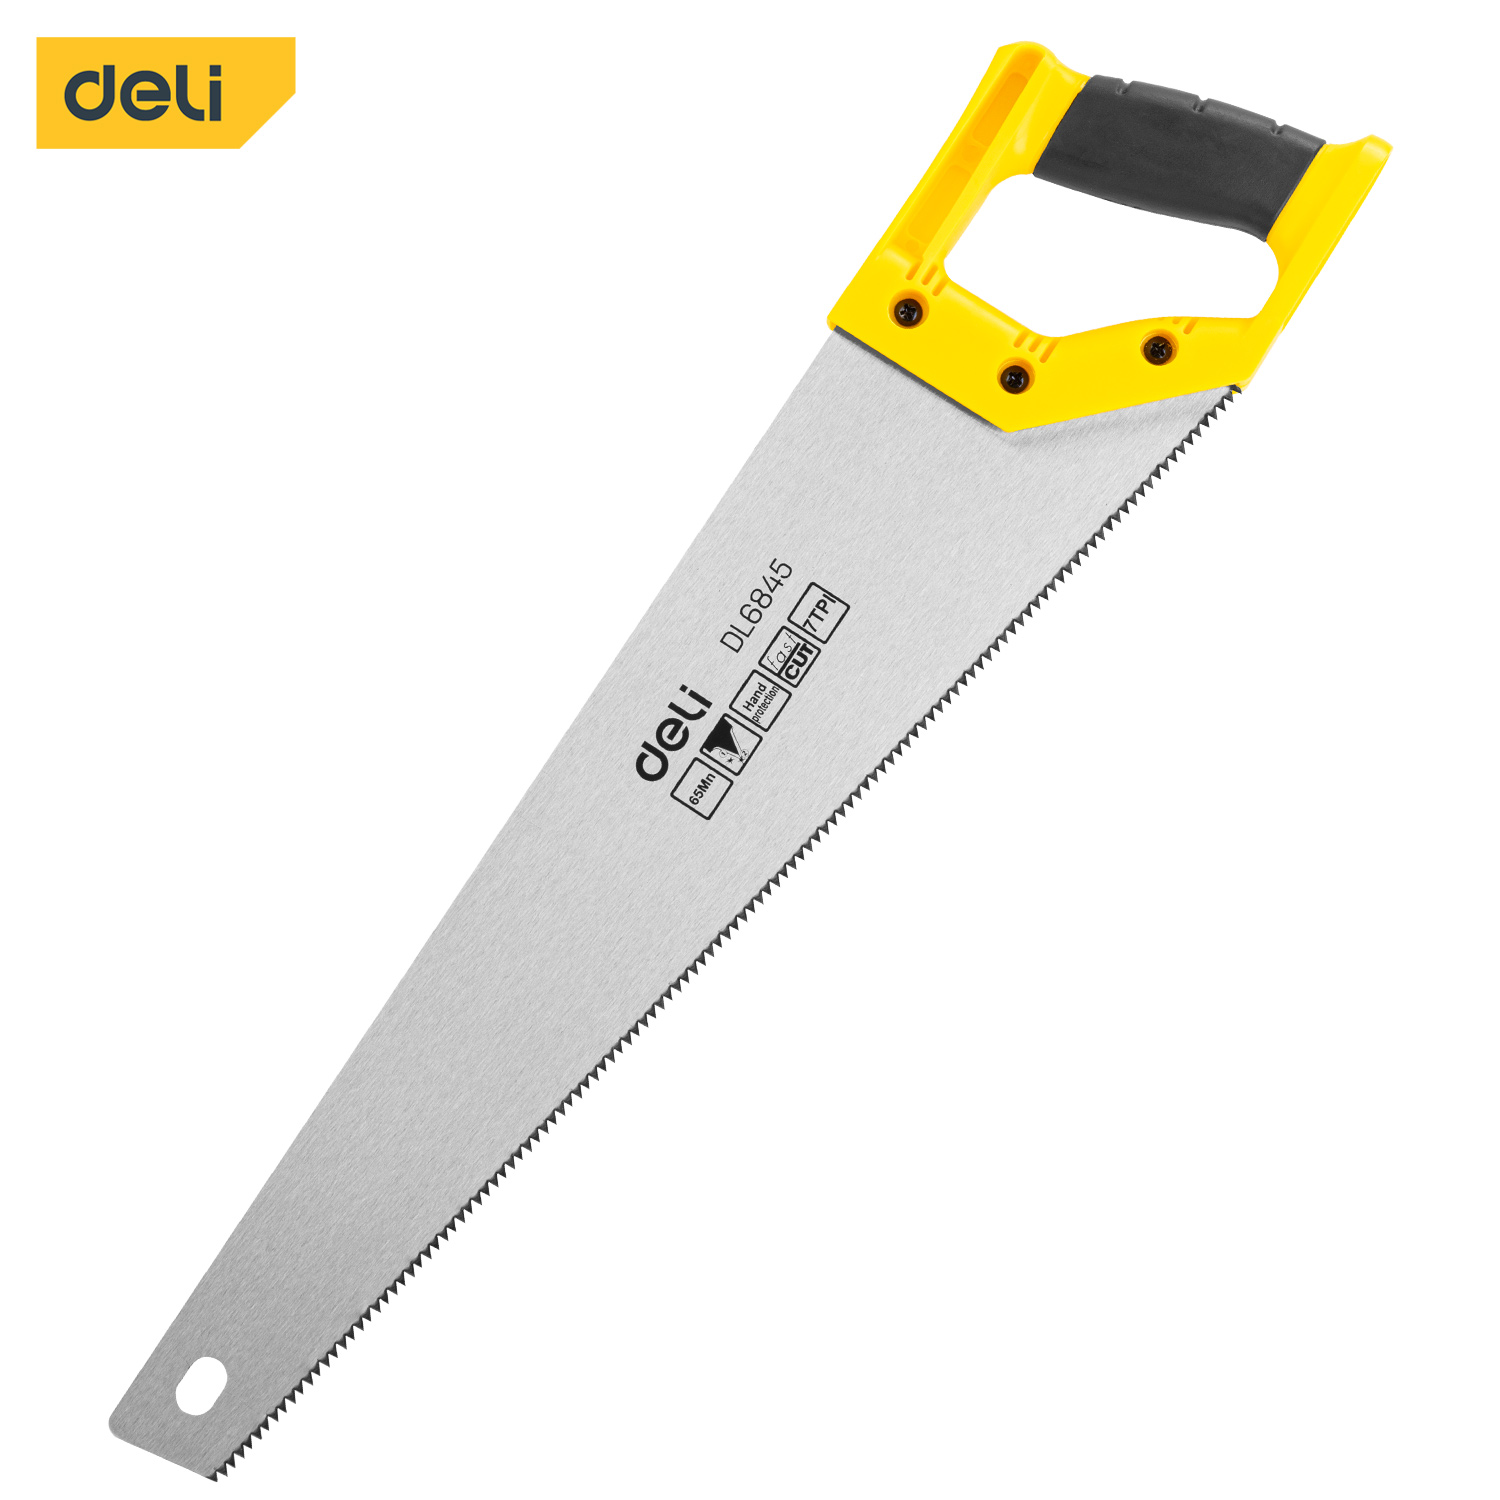 Deli-EDL6845 Hand Saw 450mm